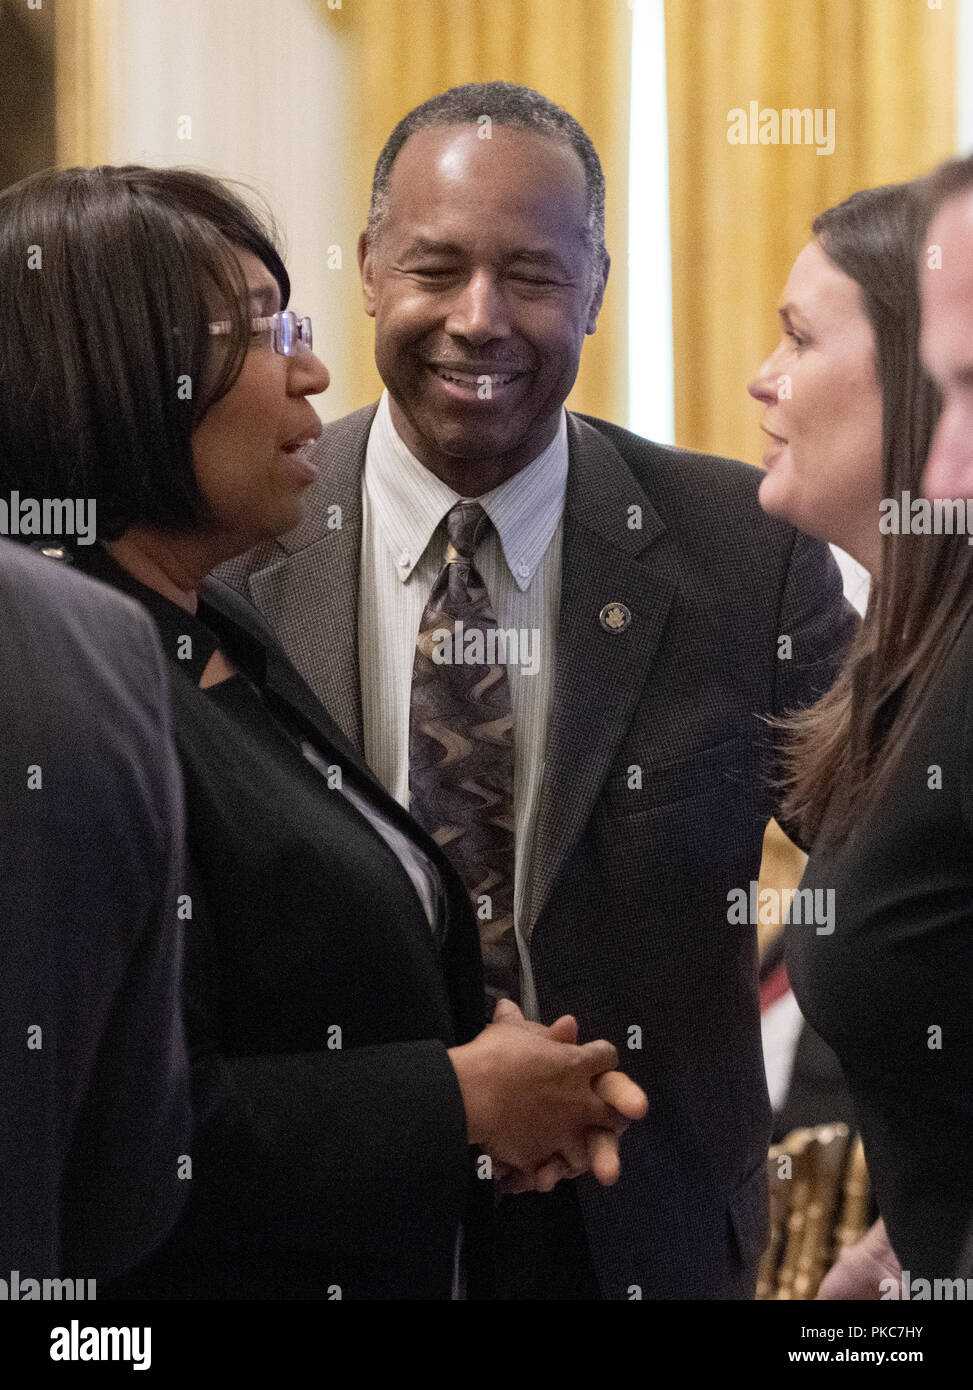 Washington, District of Columbia, USA. 12th Sep, 2018. United States Secretary of Housing and Urban Development Ben Carson, center, looks on as his wife Candy, left, and White House press secretary Sarah Huckabee Sanders, right, converse prior to the arrival of US President Donald J. Trump who will make remarks at the Congressional Medal of Honor Society Reception in the East Room of the White House in Washington, DC on Wednesday, September 12, 2018 Credit: Ron Sachs/CNP/ZUMA Wire/Alamy Live News Stock Photo